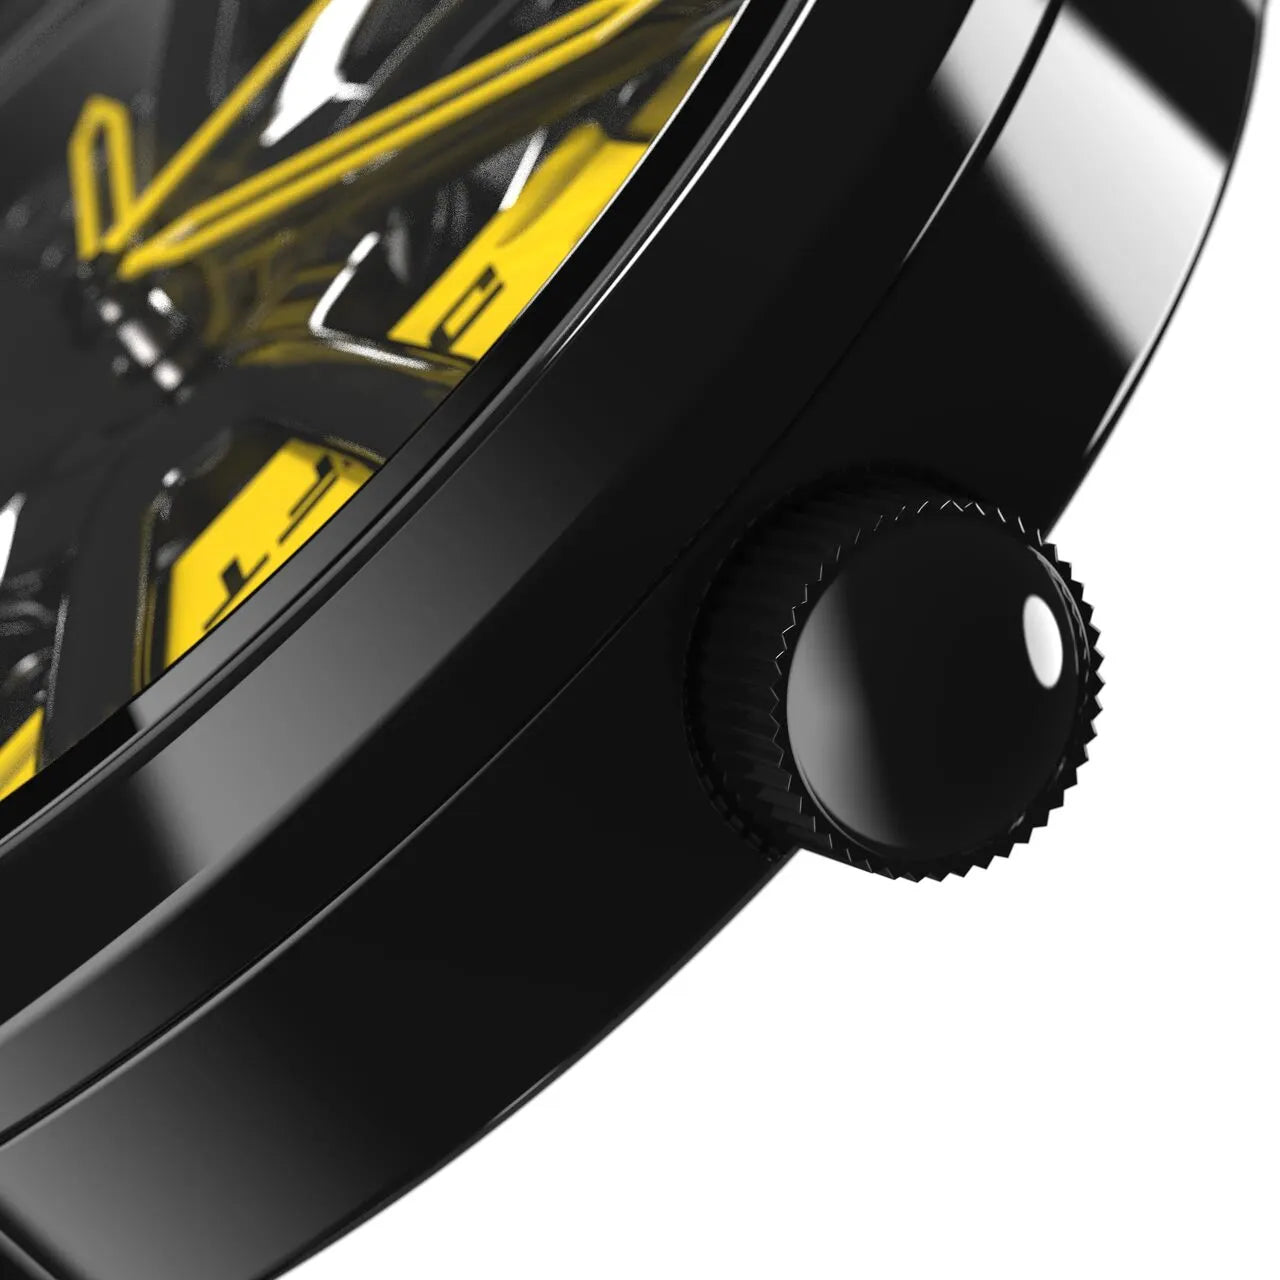 Elevate your fashion with our sleek yellow Performance GT Rim Watch! Precision-crafted by a German startup, these watches are designed for motorsport, tuning, and auto aficionados. Get ready to ignite your passion! #id_46744365433162